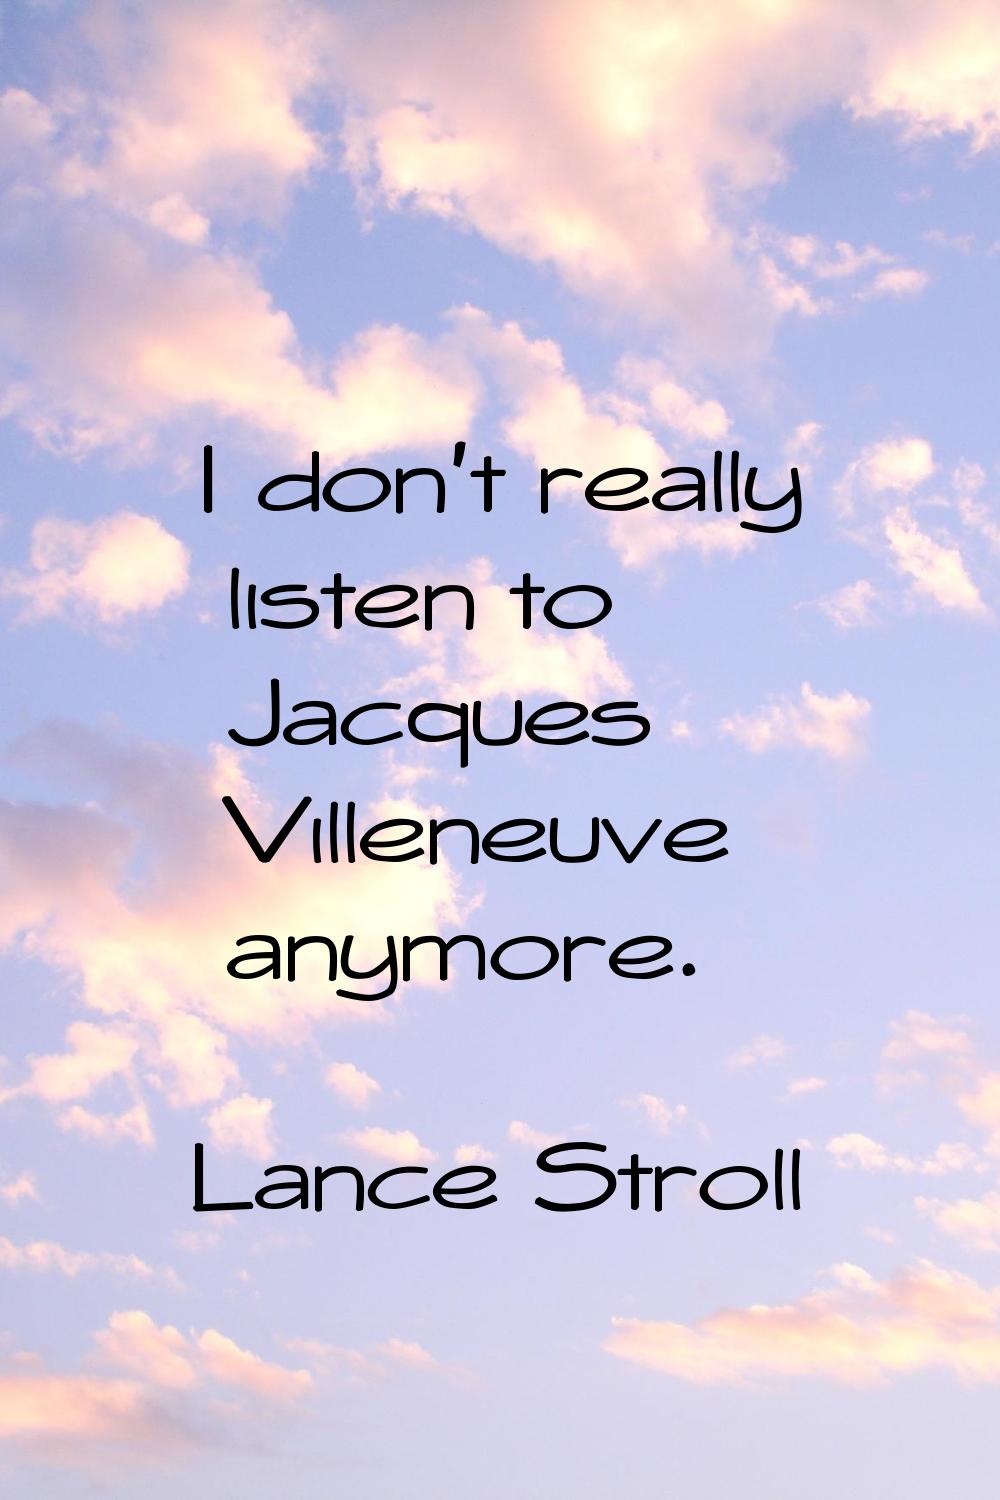 I don't really listen to Jacques Villeneuve anymore.